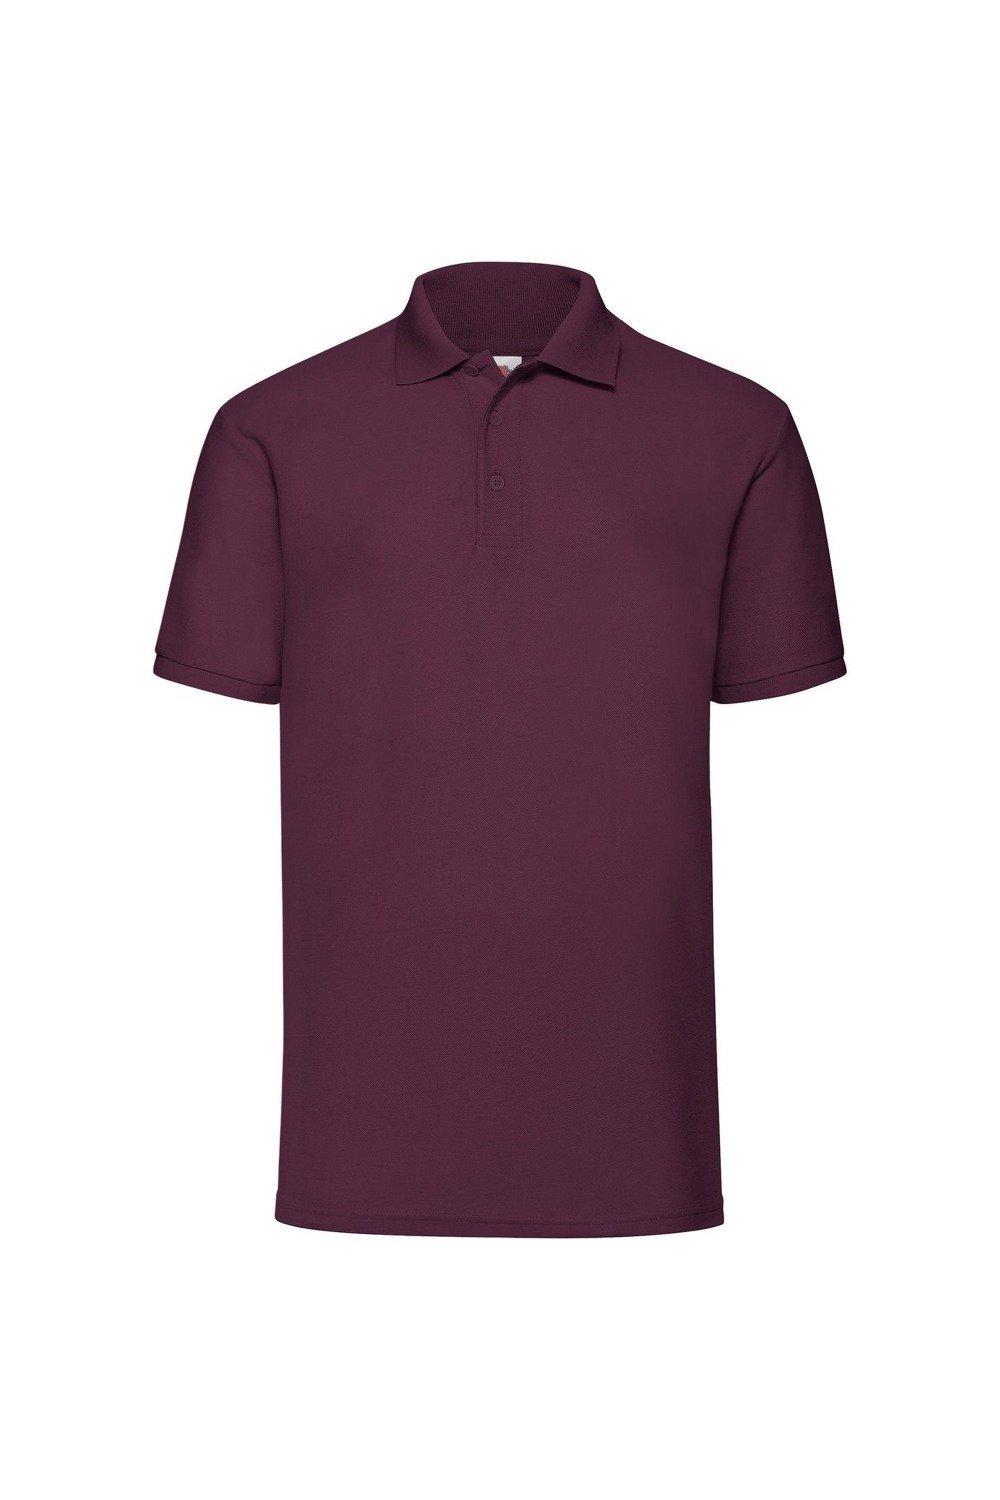 65/35 Pique Polo Shirt (Pack of 2)